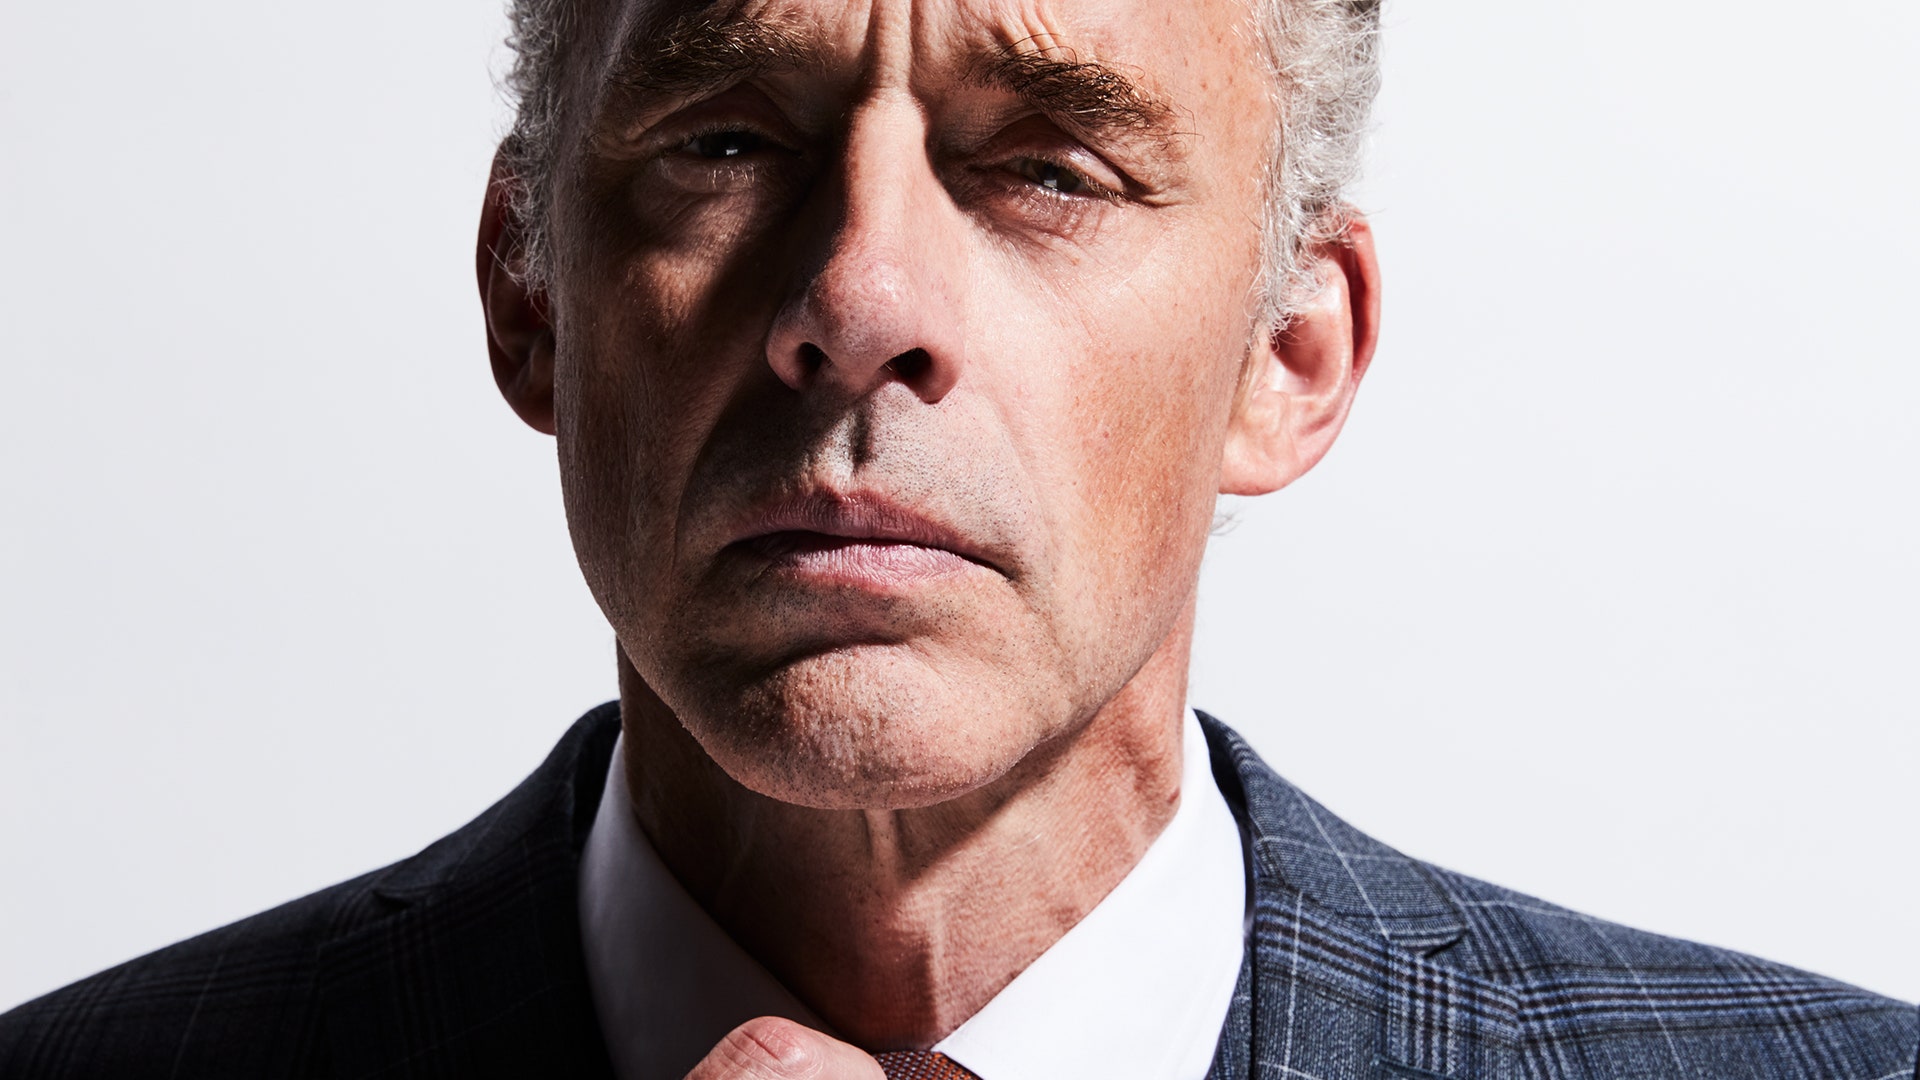 Jordan Peterson interview 2018: 'There was plenty of motivation to take me out. It just didn't work'